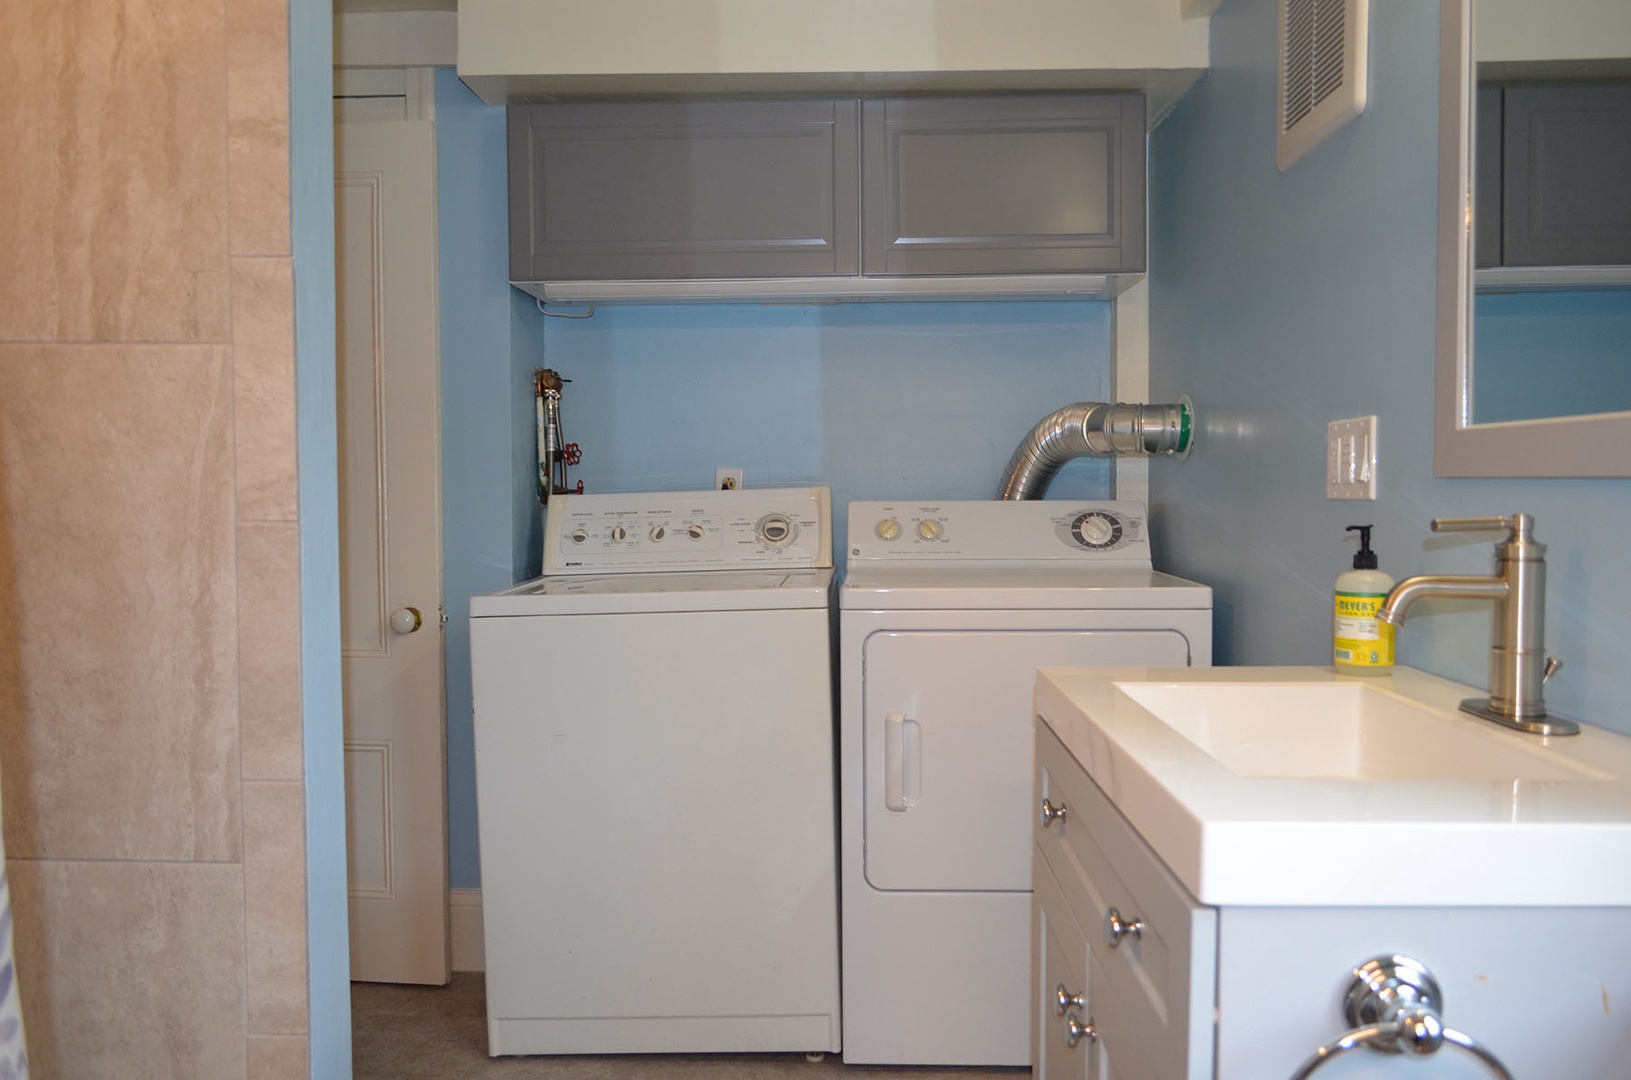 The washer/dryer units are located in the first floor full bath.